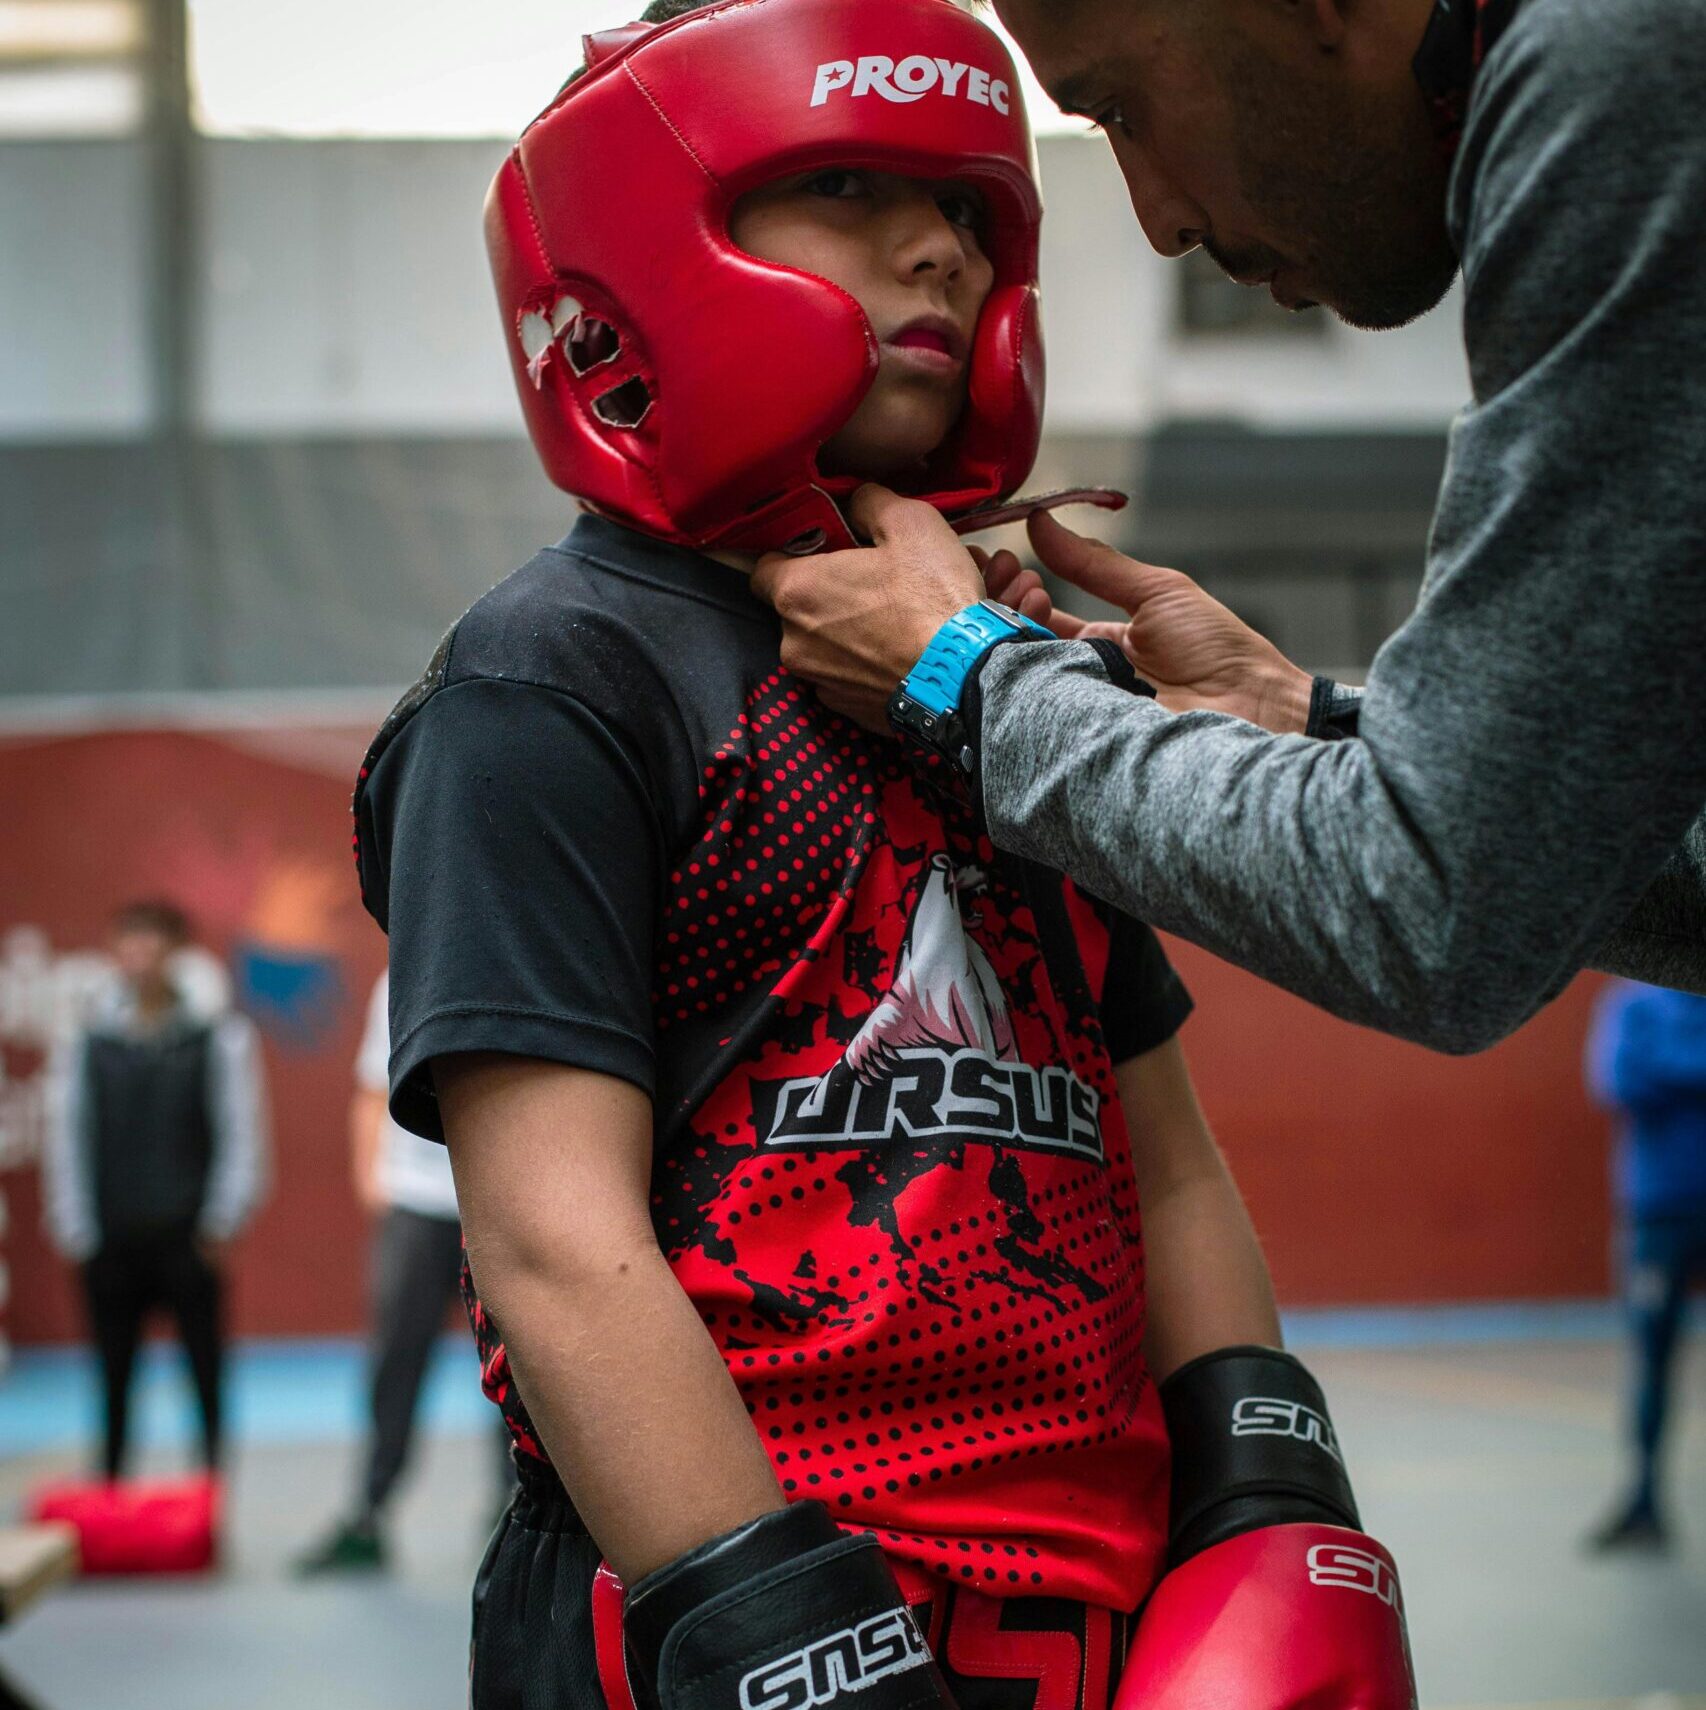 Martial Arts kid getting padded helmet put on before a match